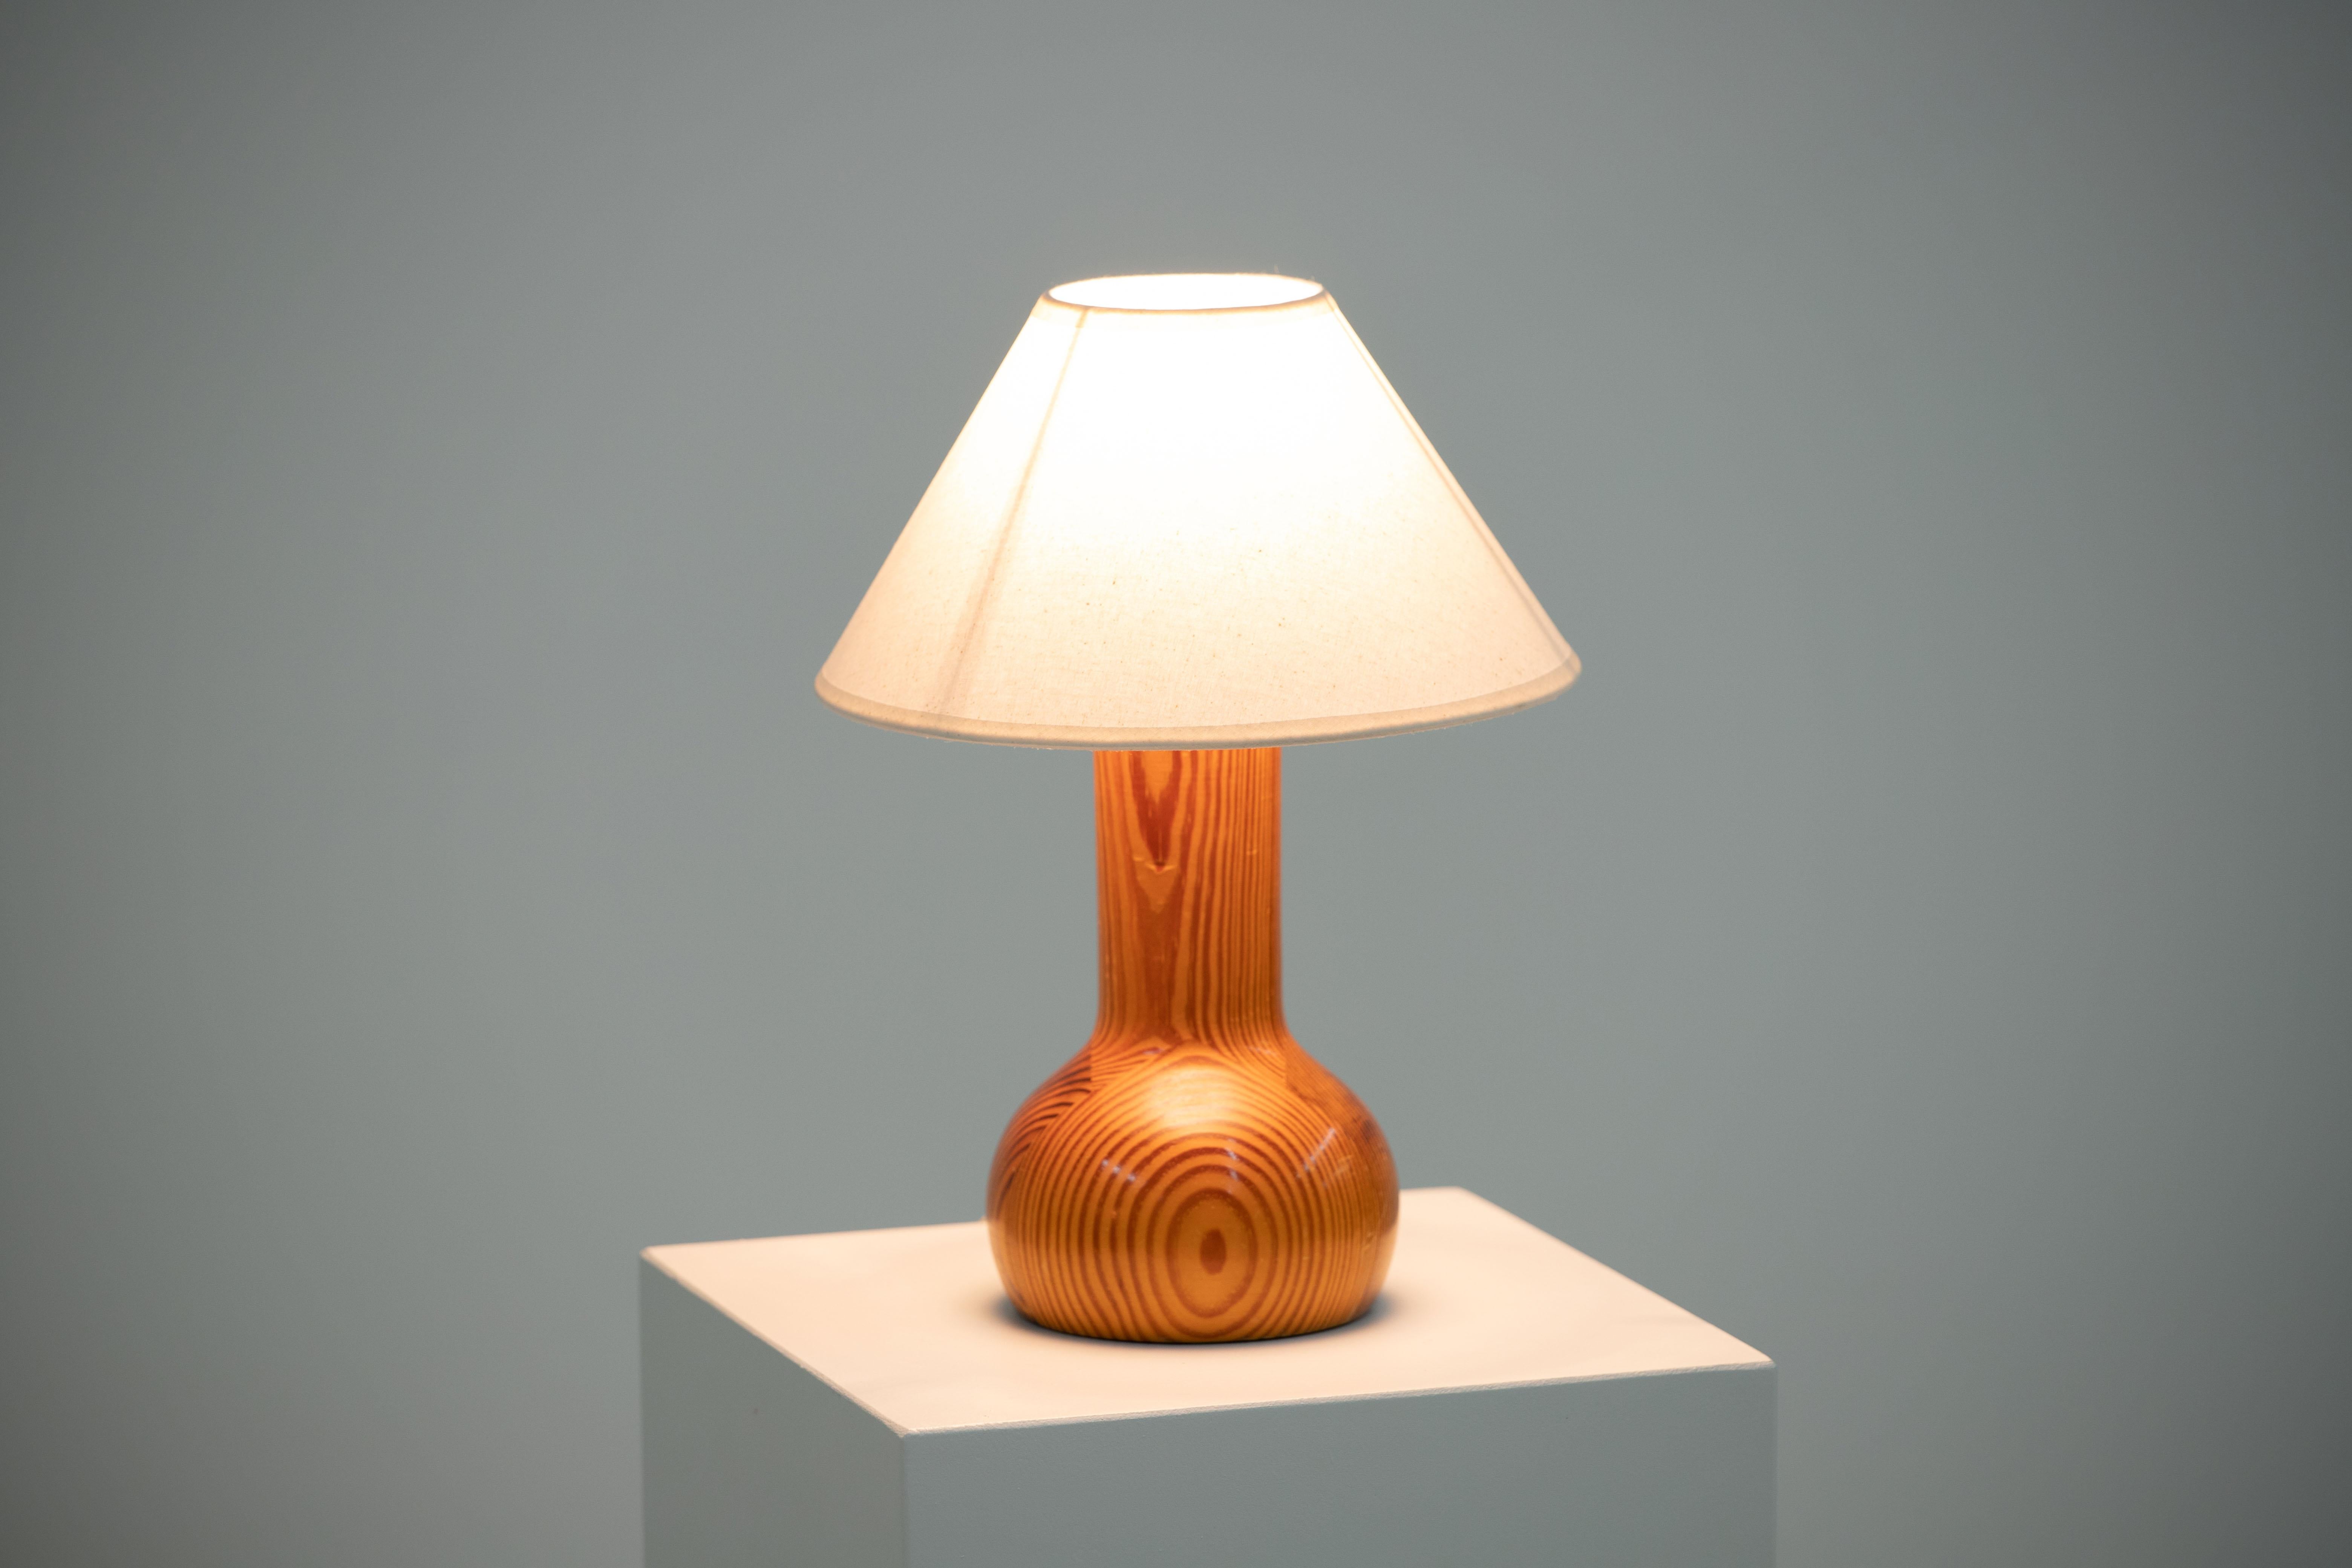 Introducing a captivating mid-century table lamp in solid pine, crafted in Denmark around 1960. This lamp showcases the iconic style reminiscent of Uno Kristiansson's designs.

Preserving its original charm, this lamp is in good general condition